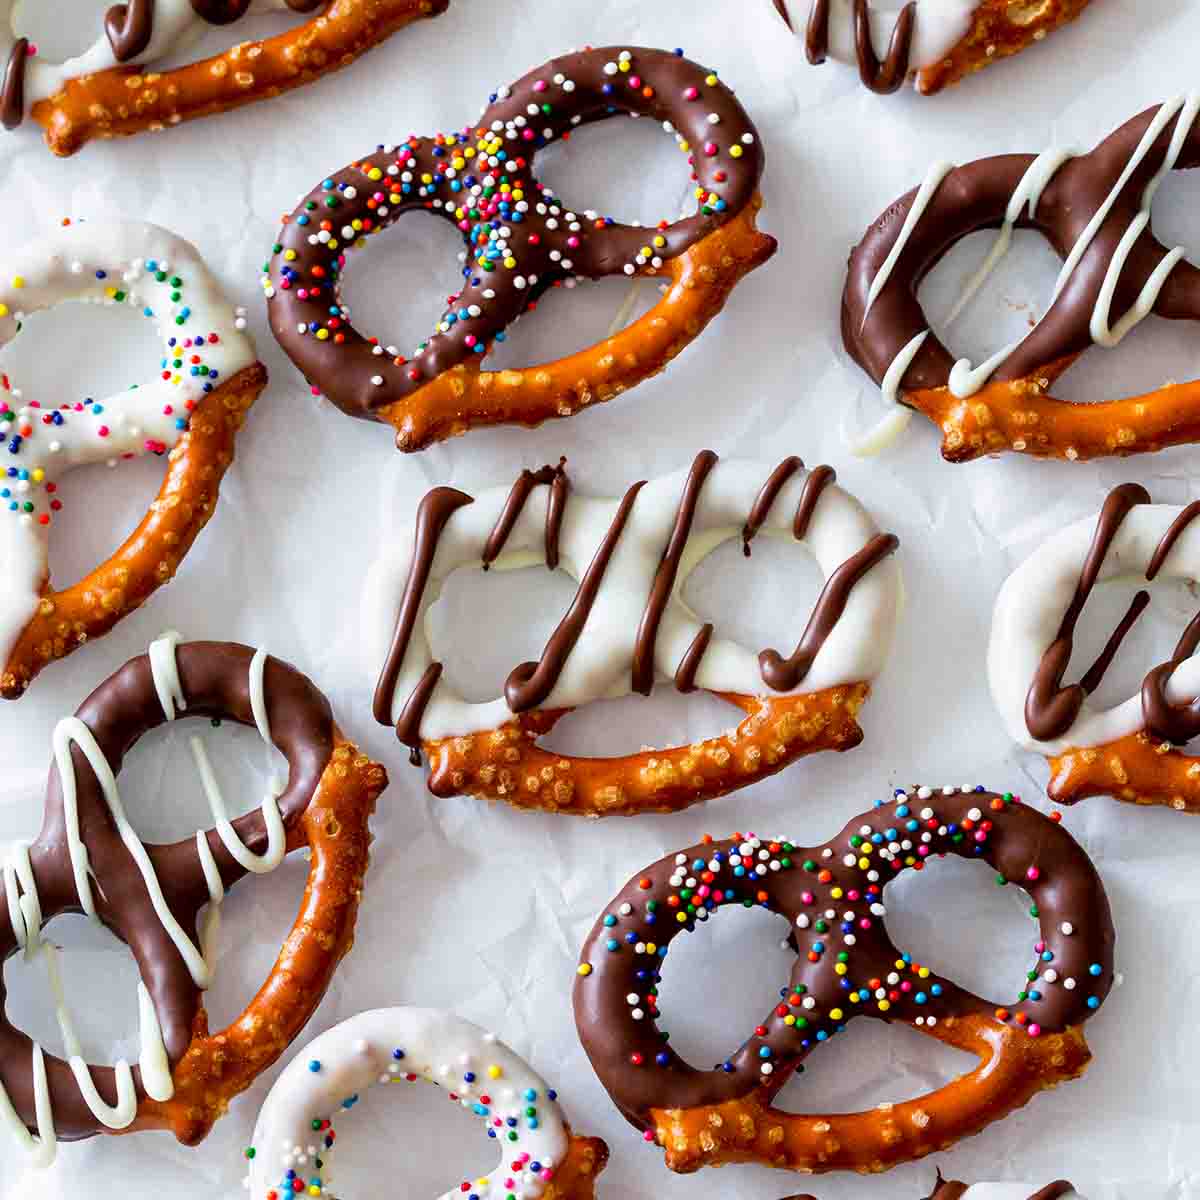 An assortment of chocolate covered pretzels with white and dark chocolate coating and sprinkles.